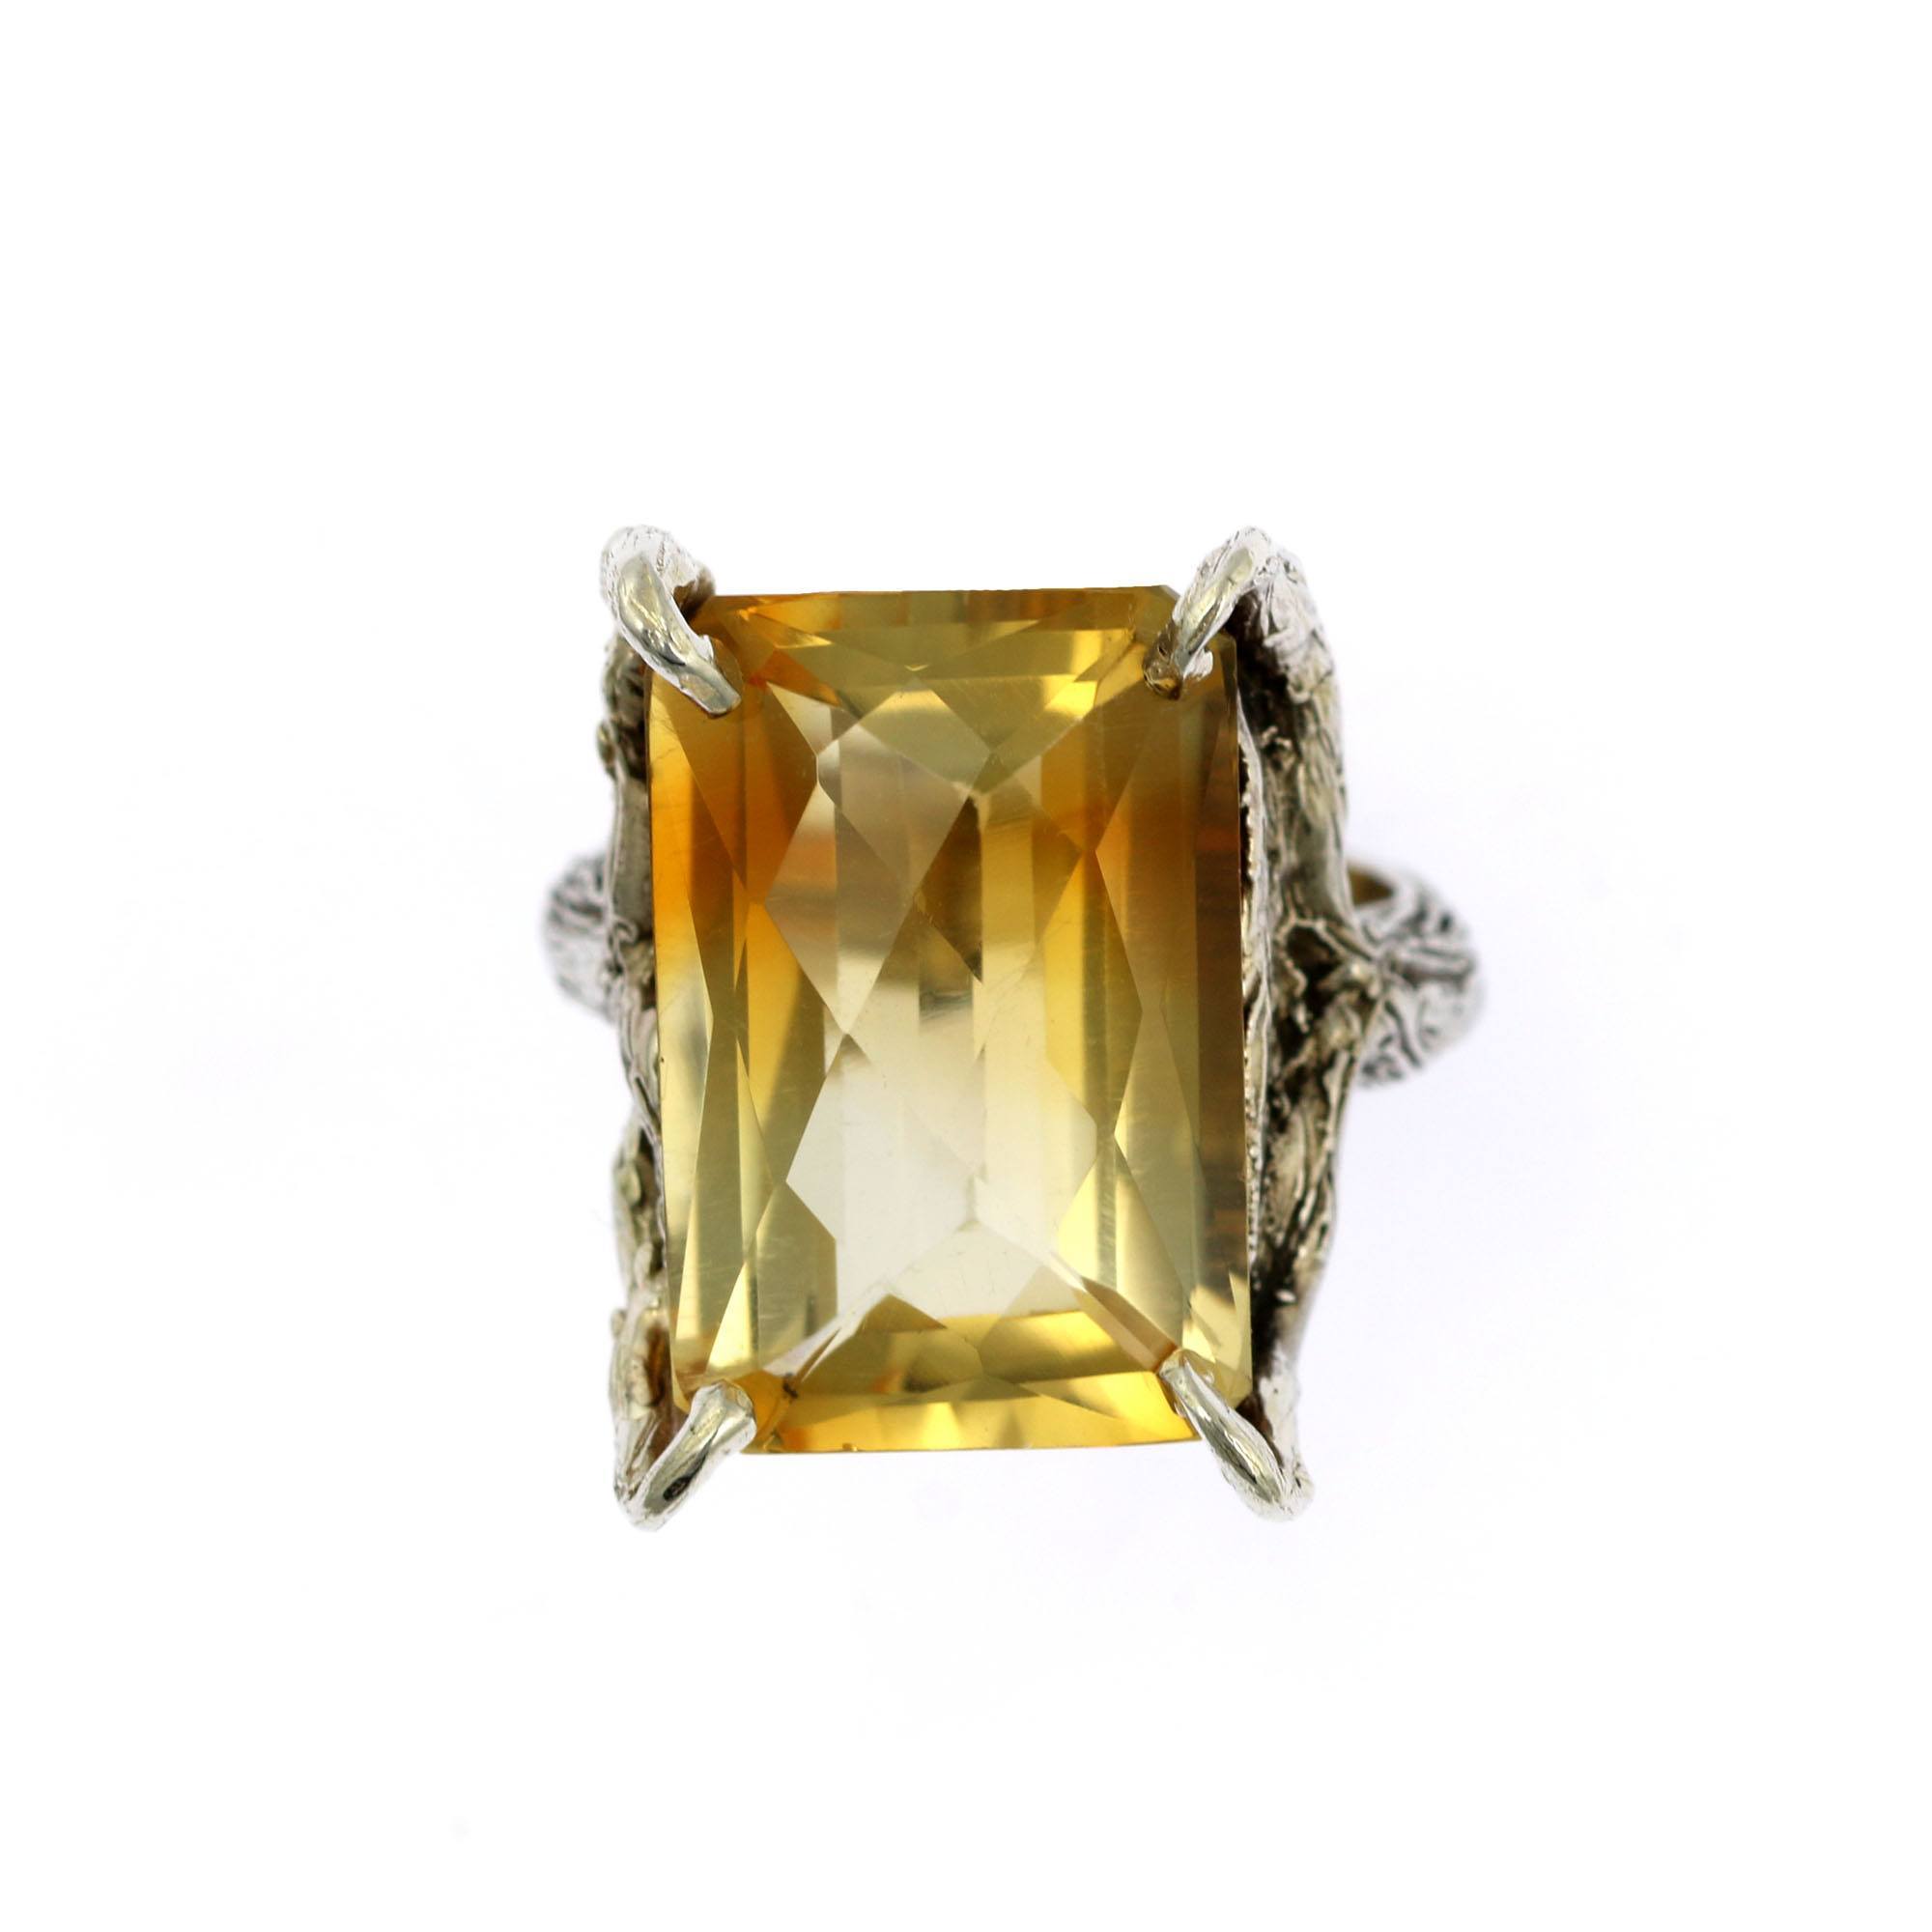 Front View of Citrine Sterling Silver Cocktail Ring